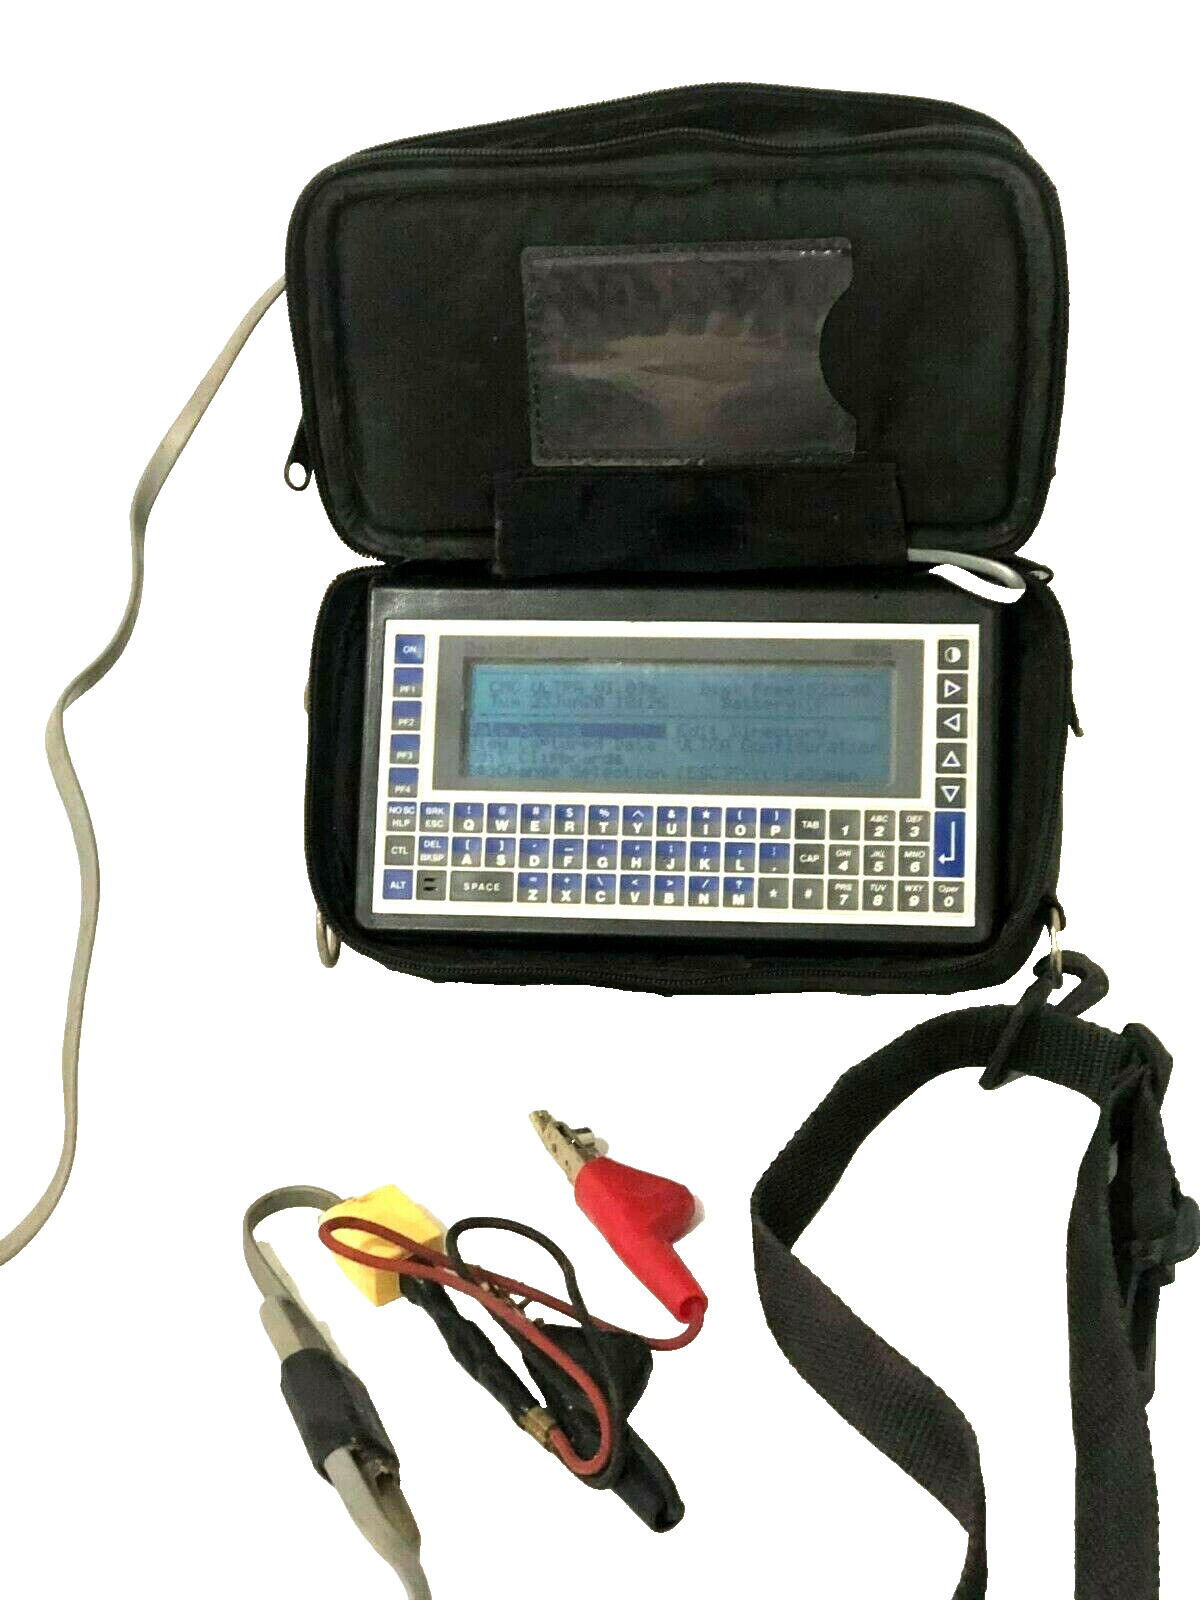 CMC Datastar 7910D Handheld Data Microterminal Programmer Computer W/CASE AND CA